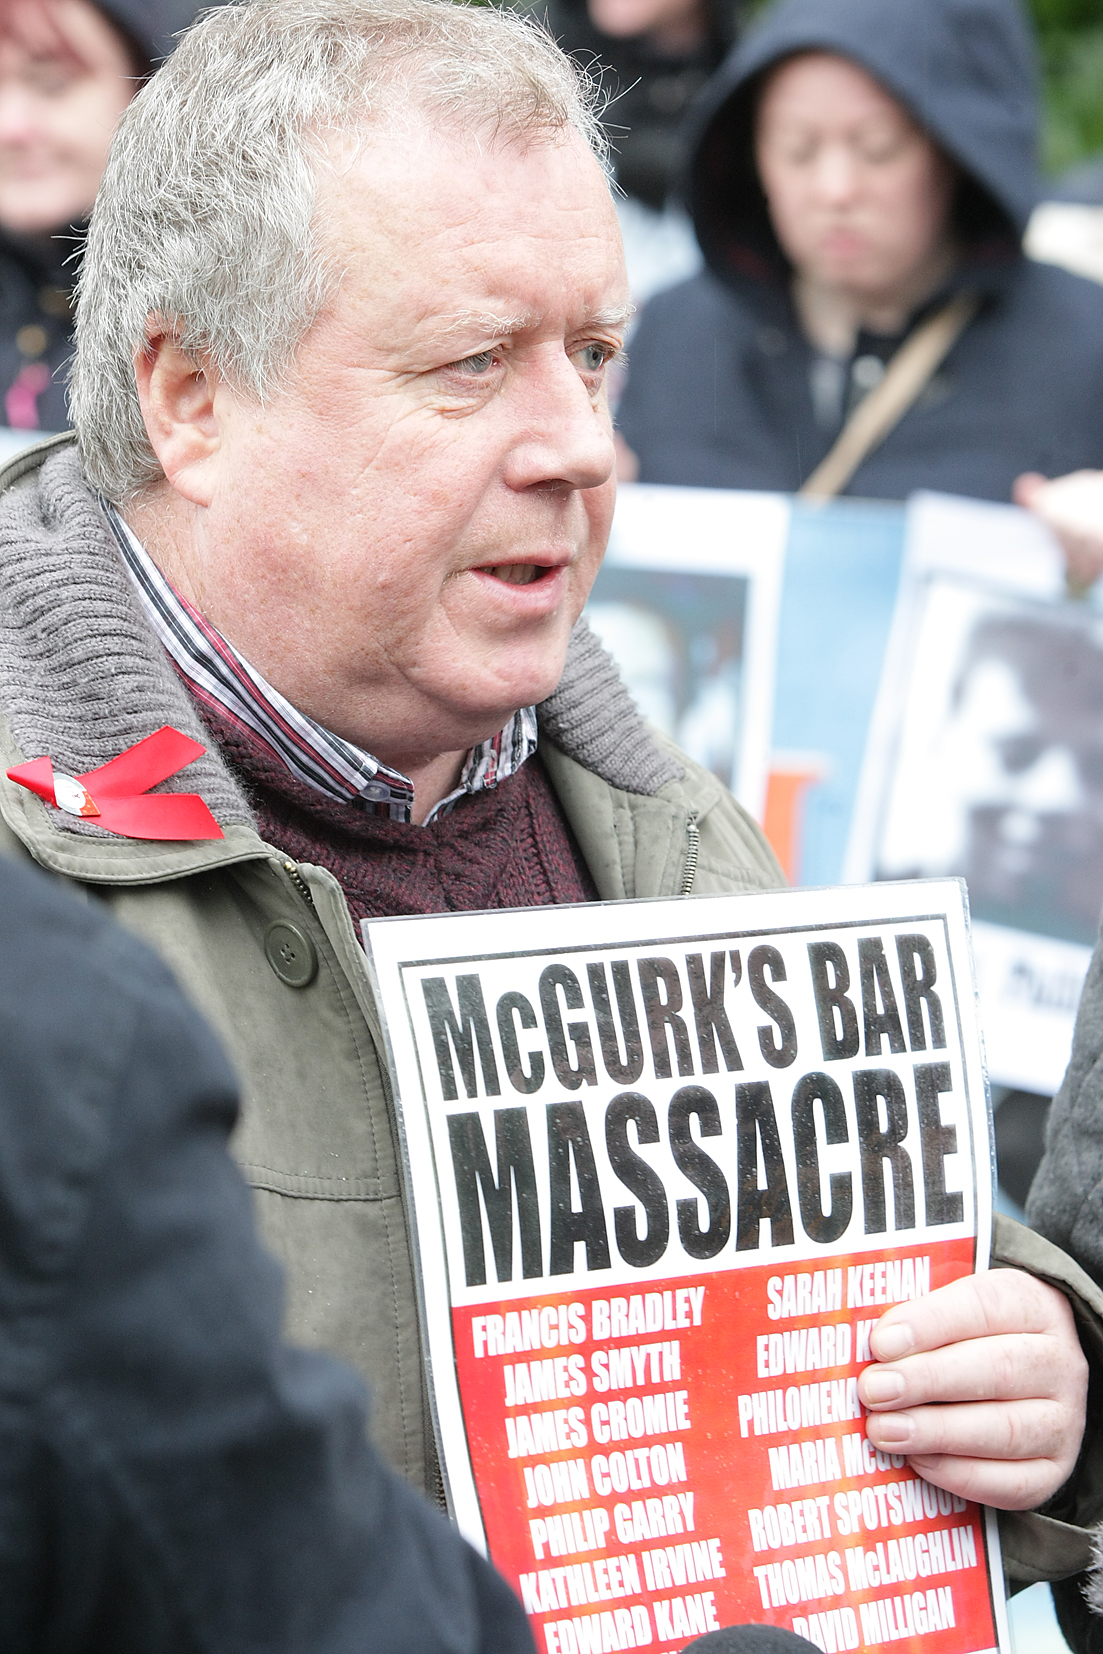  Robert McClenaghan’s grandfather, Philip Garry (73), was the oldest person to die in the 1971 bombing